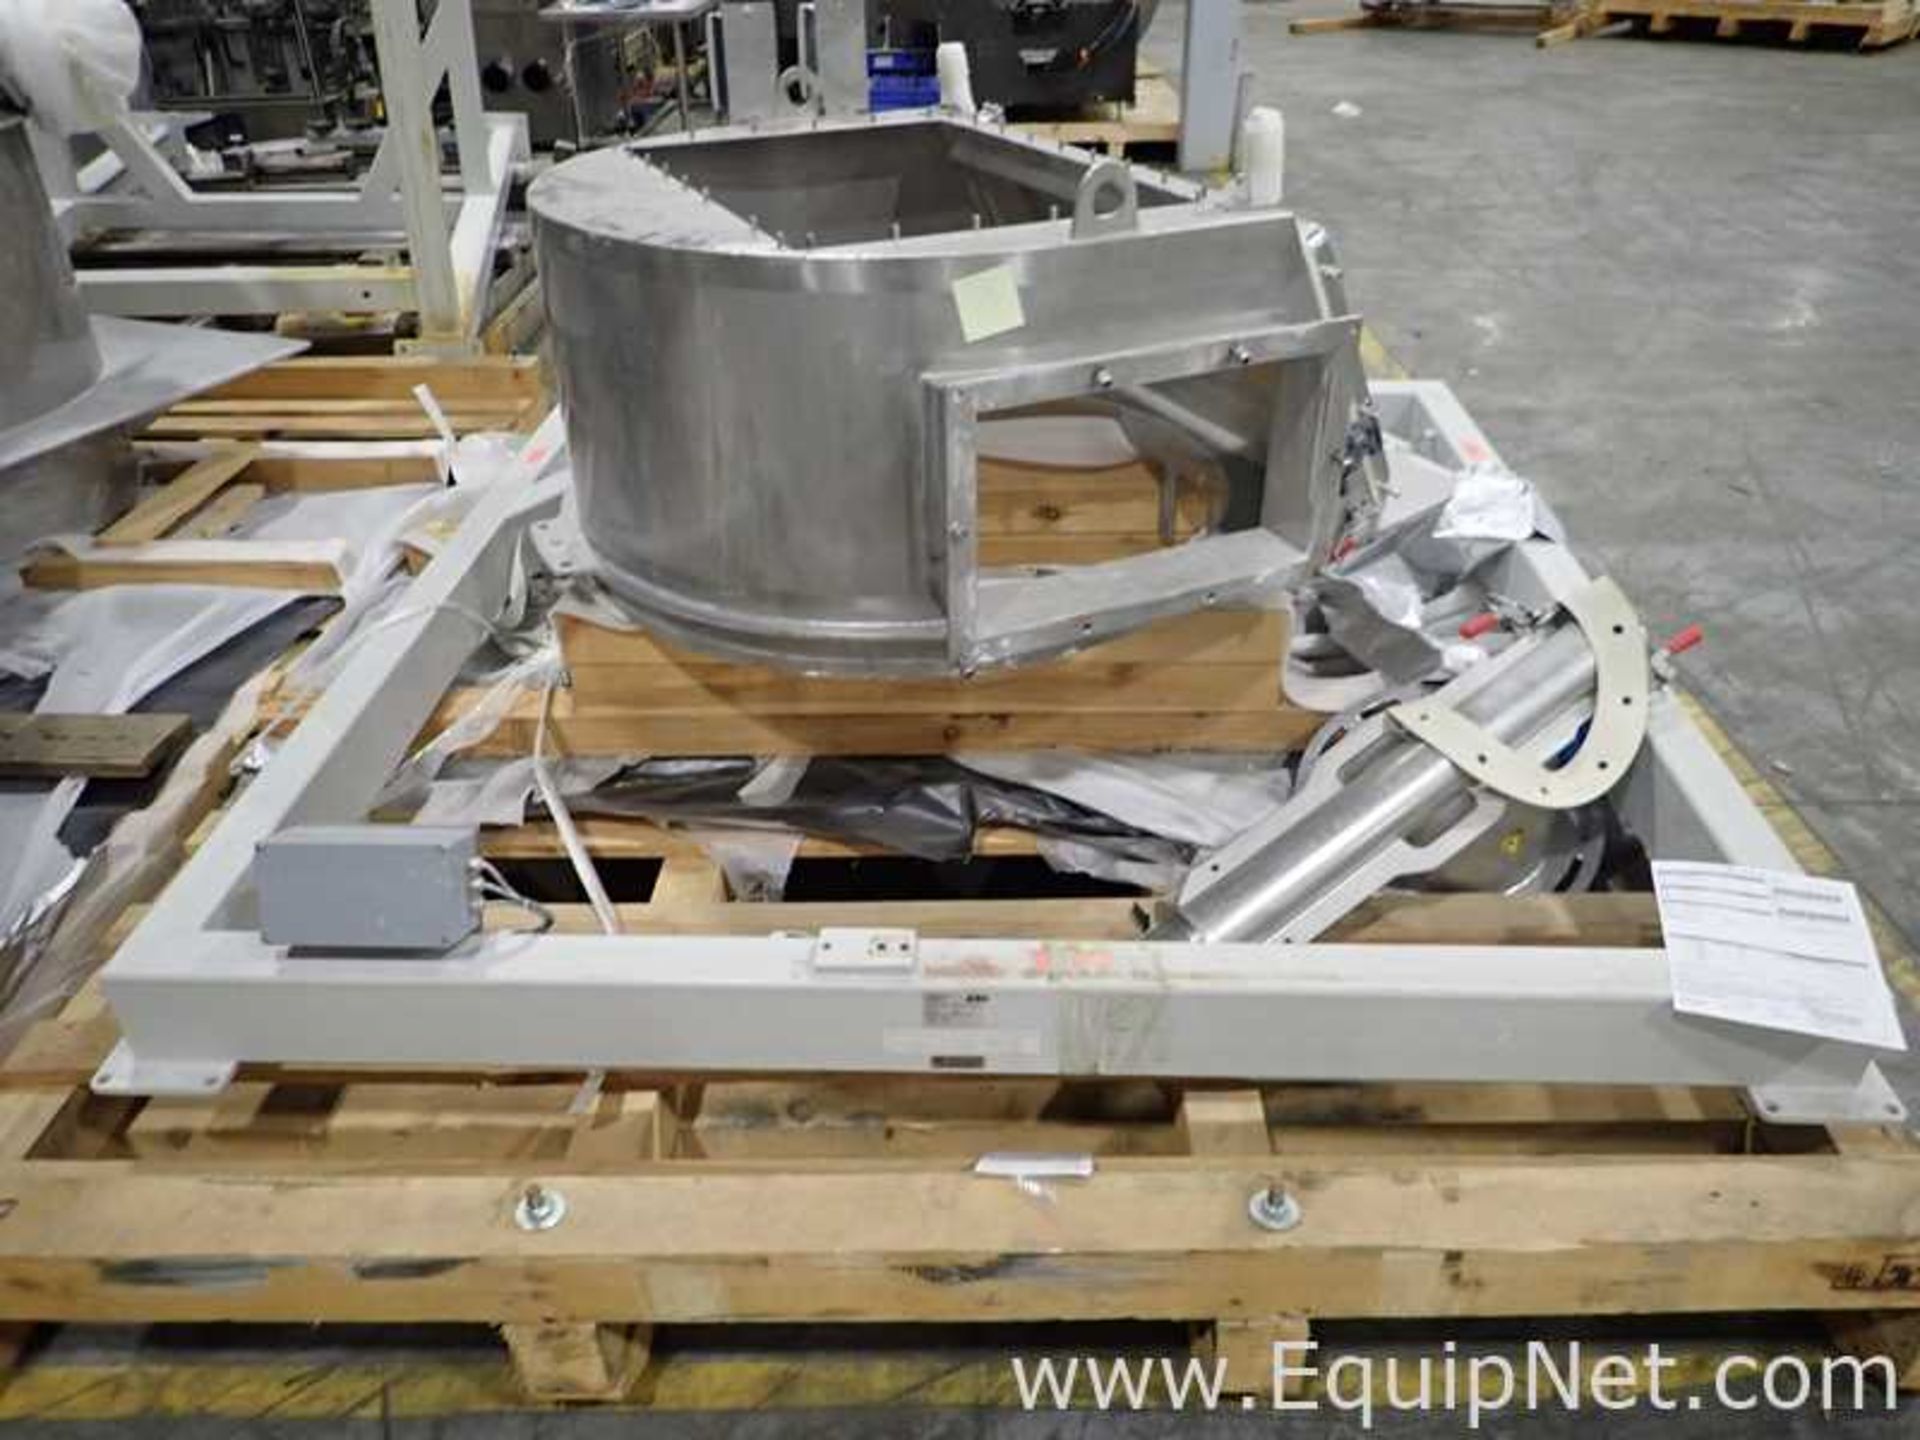 AZO Raw Material Production Equipment - Image 10 of 21